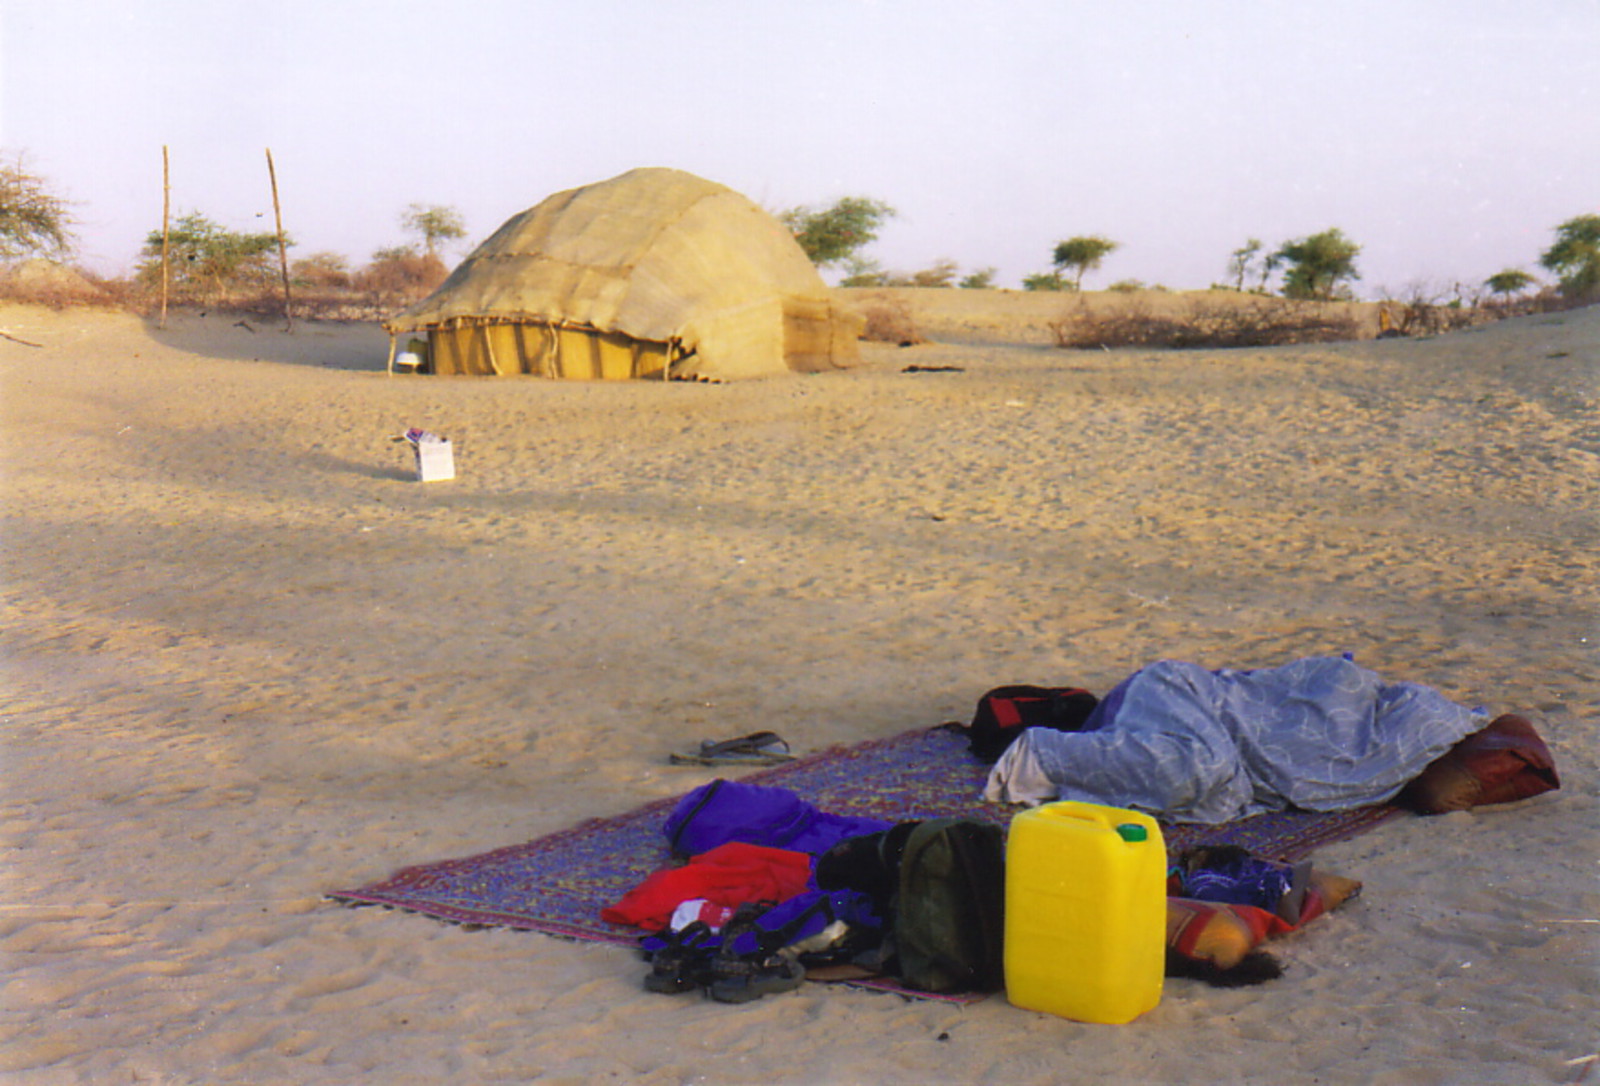 A camp on the sand by a Tuareg tent